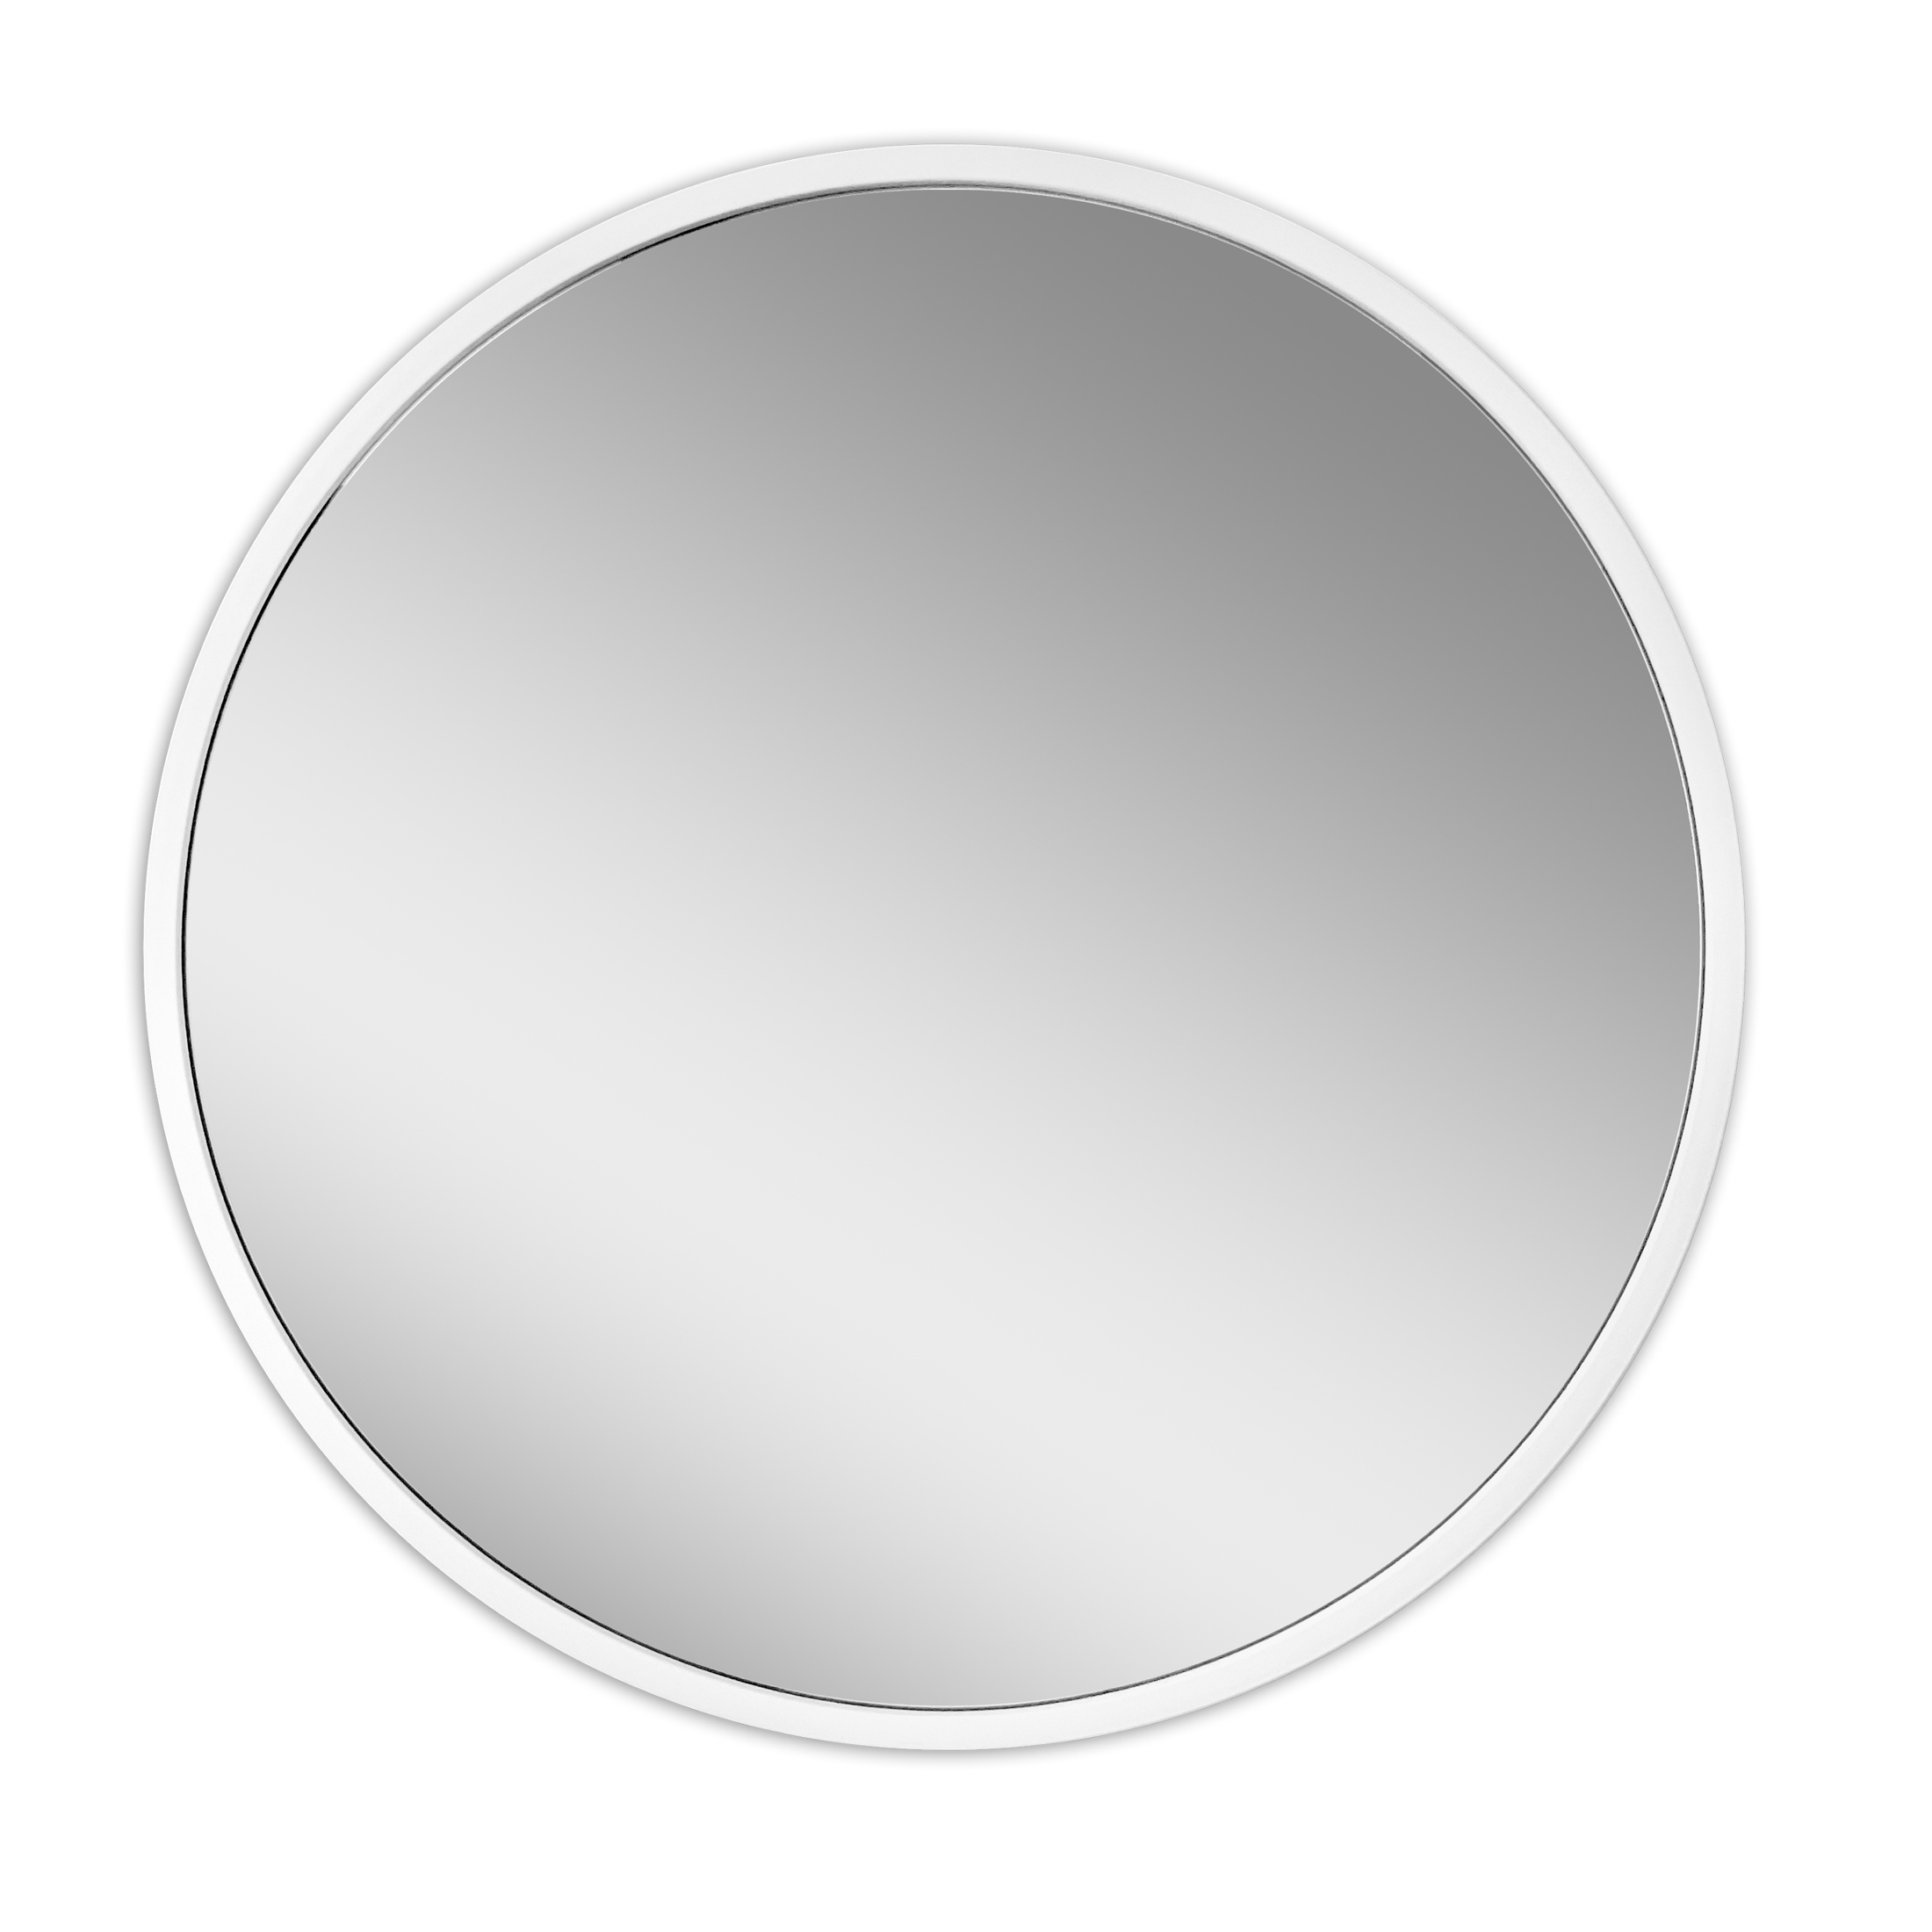 Mainstays 18 Traditional Plastic Round Wall Mount Mirror, White